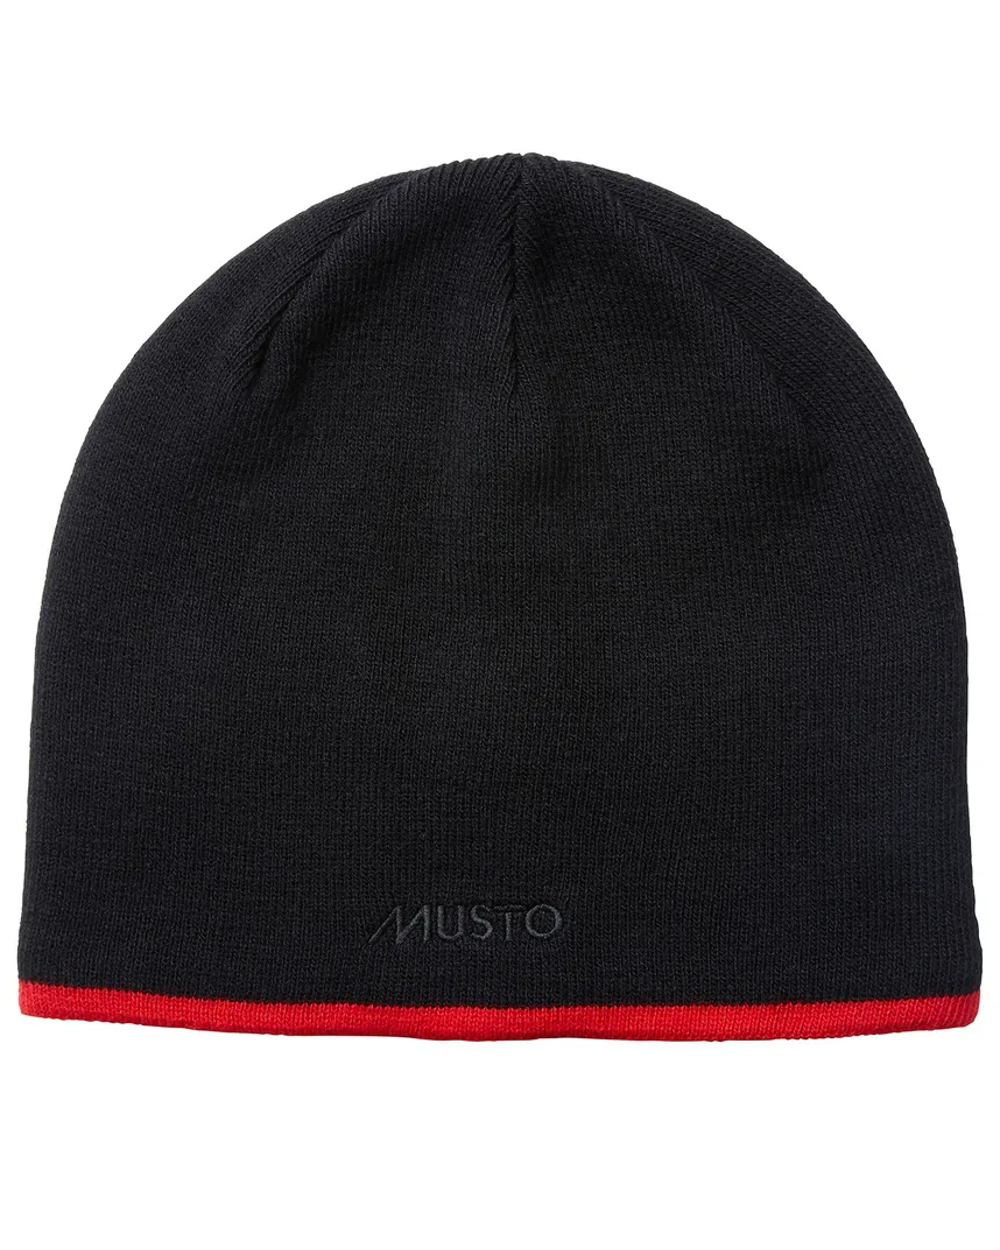 Musto Knitted Beanie